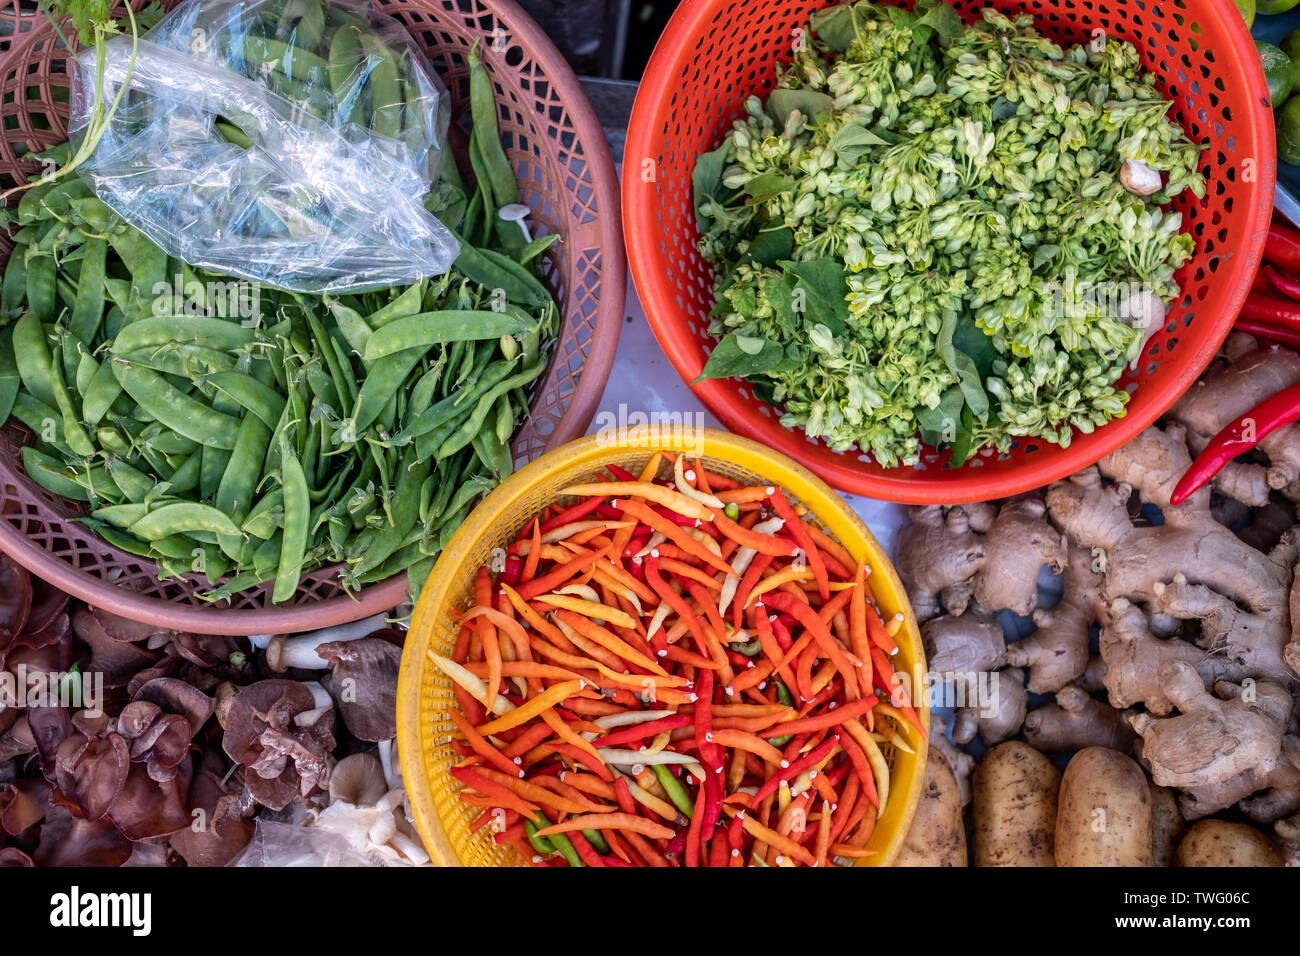 Overhead view of fresh vegetables in a market, Thailand Stock Photo